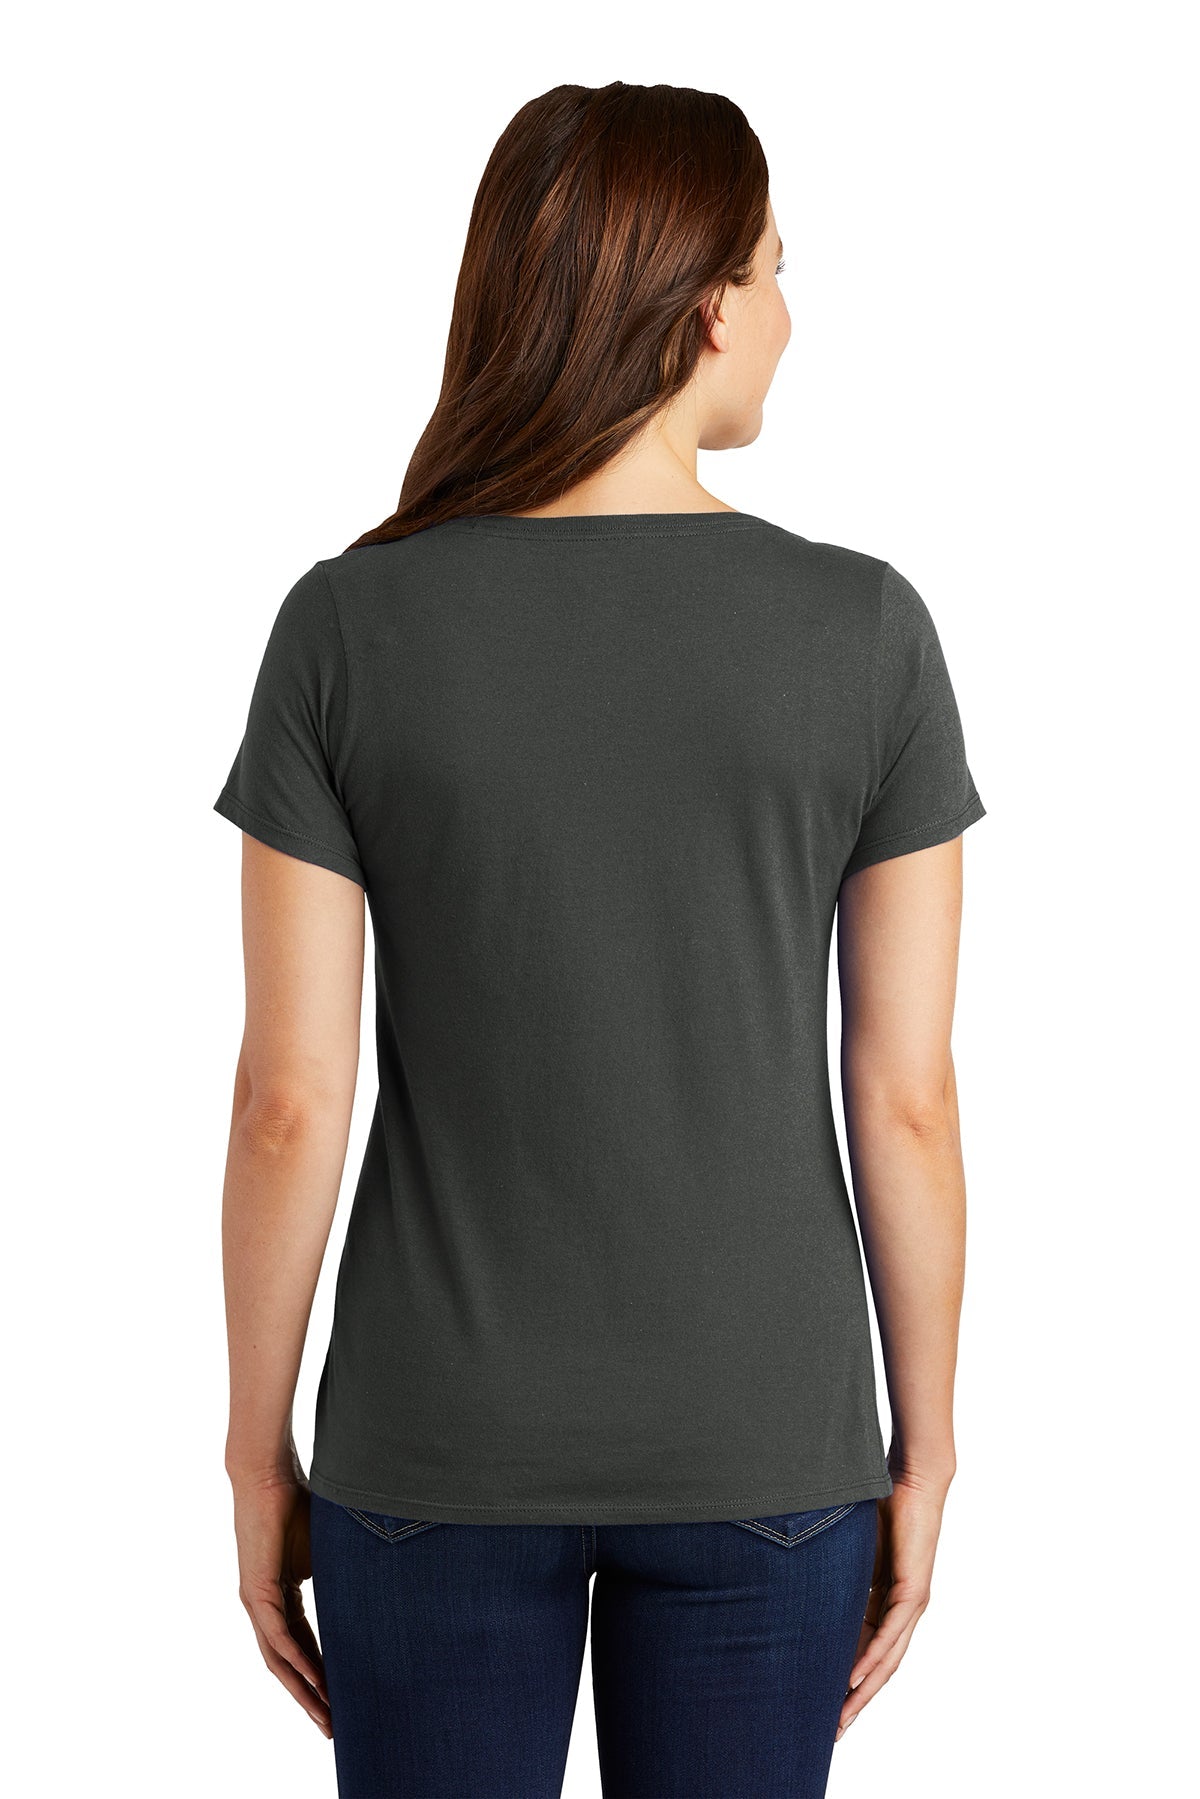 nike-ladies-dri-fit-cotton-poly-scoop-neck-tee-nkbq5234-anthracite